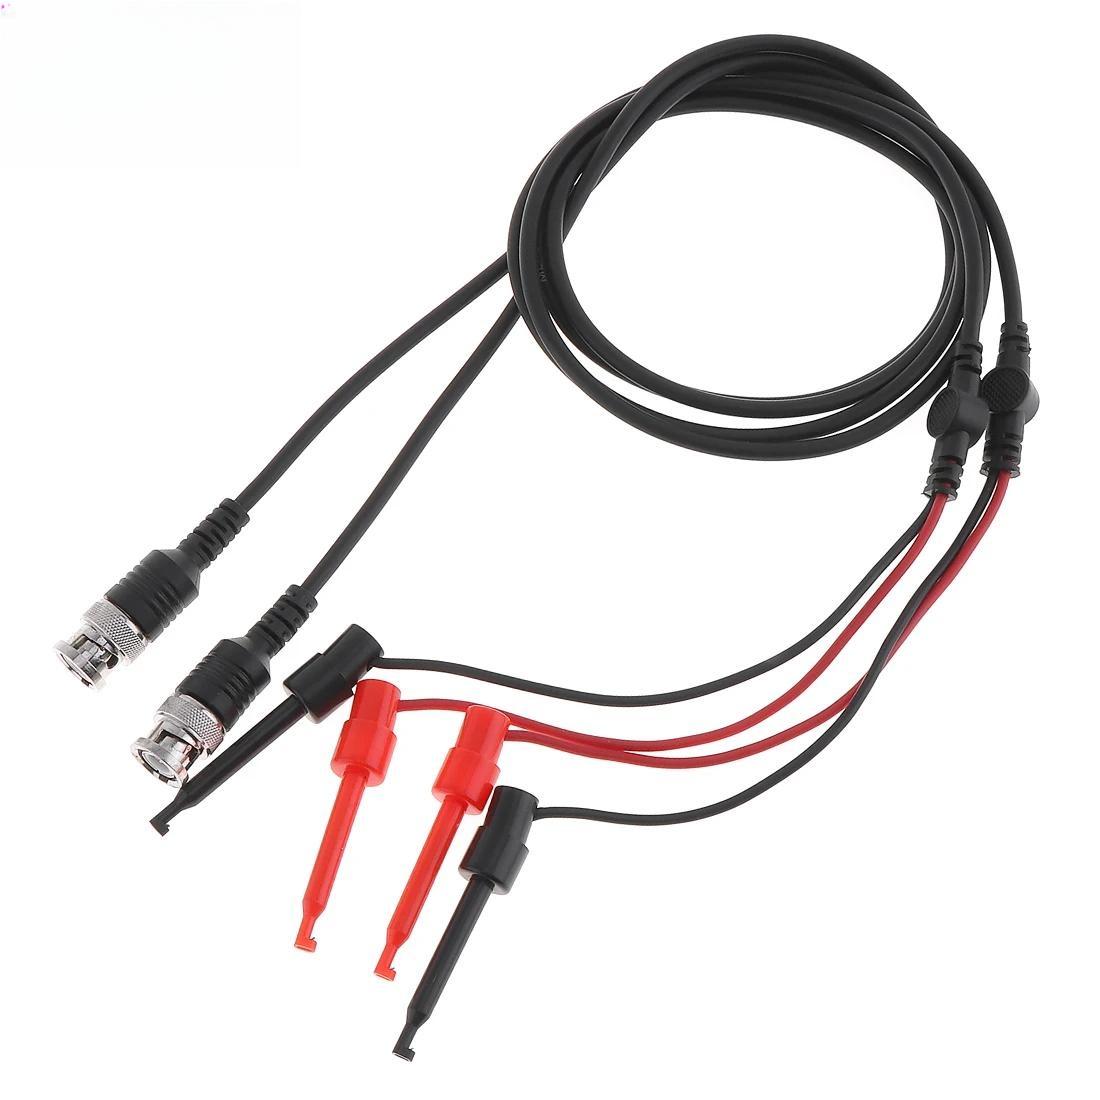 2pcs/lot BNC Male Plug Q9 to Dual Testing Hook Clip Test Leads Probe Coaxial Cable Line